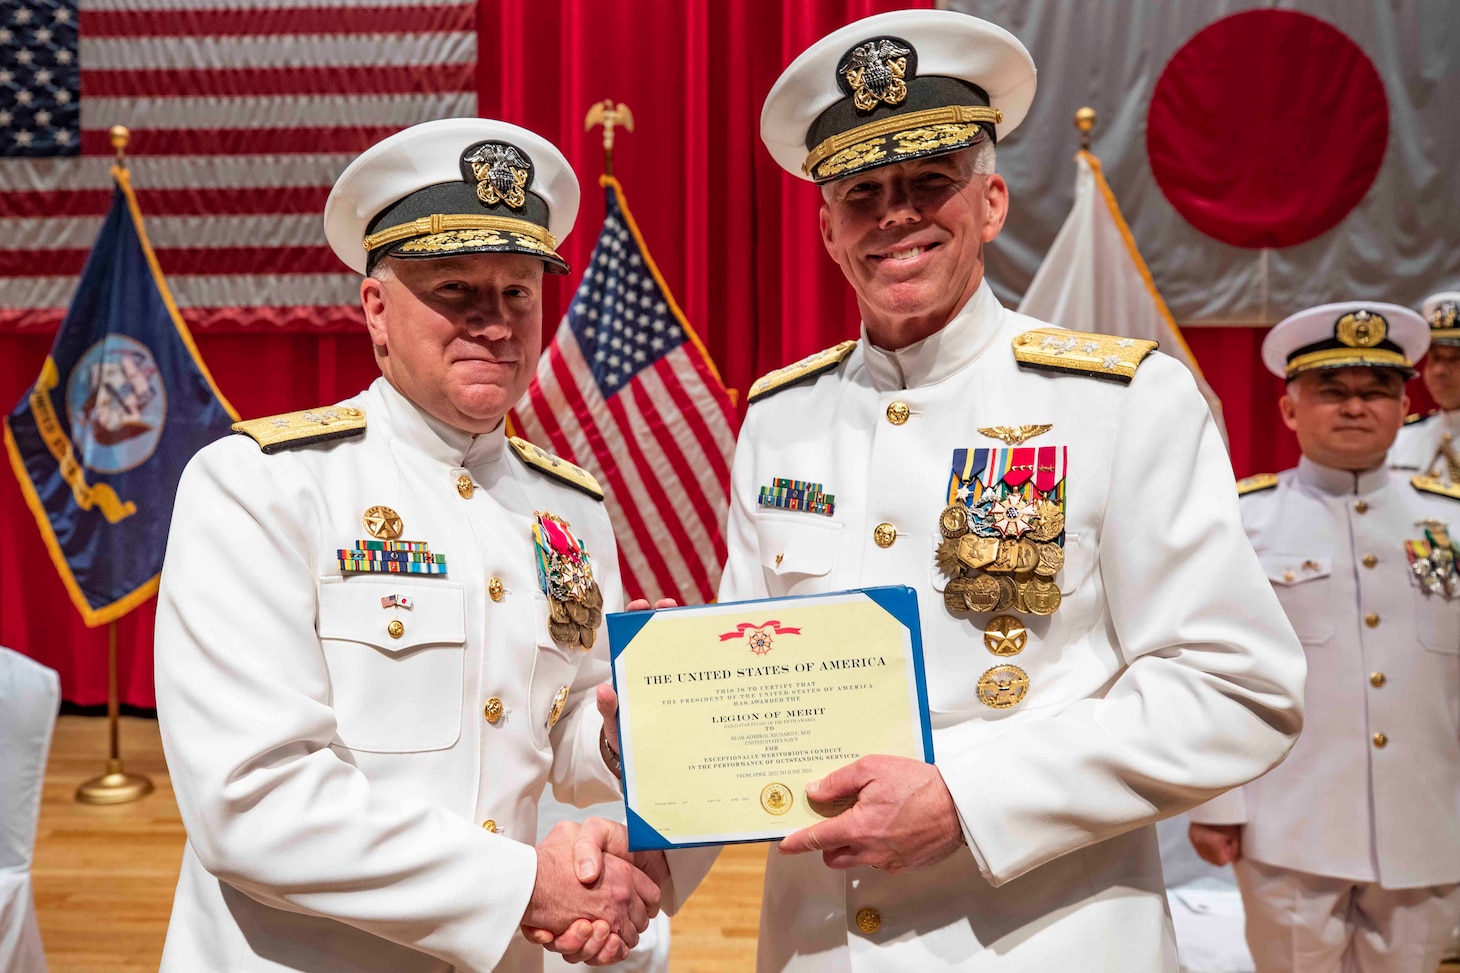 Vice Adm. Karl Thomas, commander, U.S. 7th Fleet, right, presents the Legion of Merit to Rear Adm. Rick Seif, left, outgoing commanding officer, Commander, Submarine Group 7 during a change of command ceremony at Commander, Fleet Activities Yokosuka, Japan, on June 2, 2023. Submarine Group 7 directs forward-deployed, combat capable forces across the full spectrum of undersea warfare throughout the Western Pacific, Indian Ocean, and Arabian Sea.